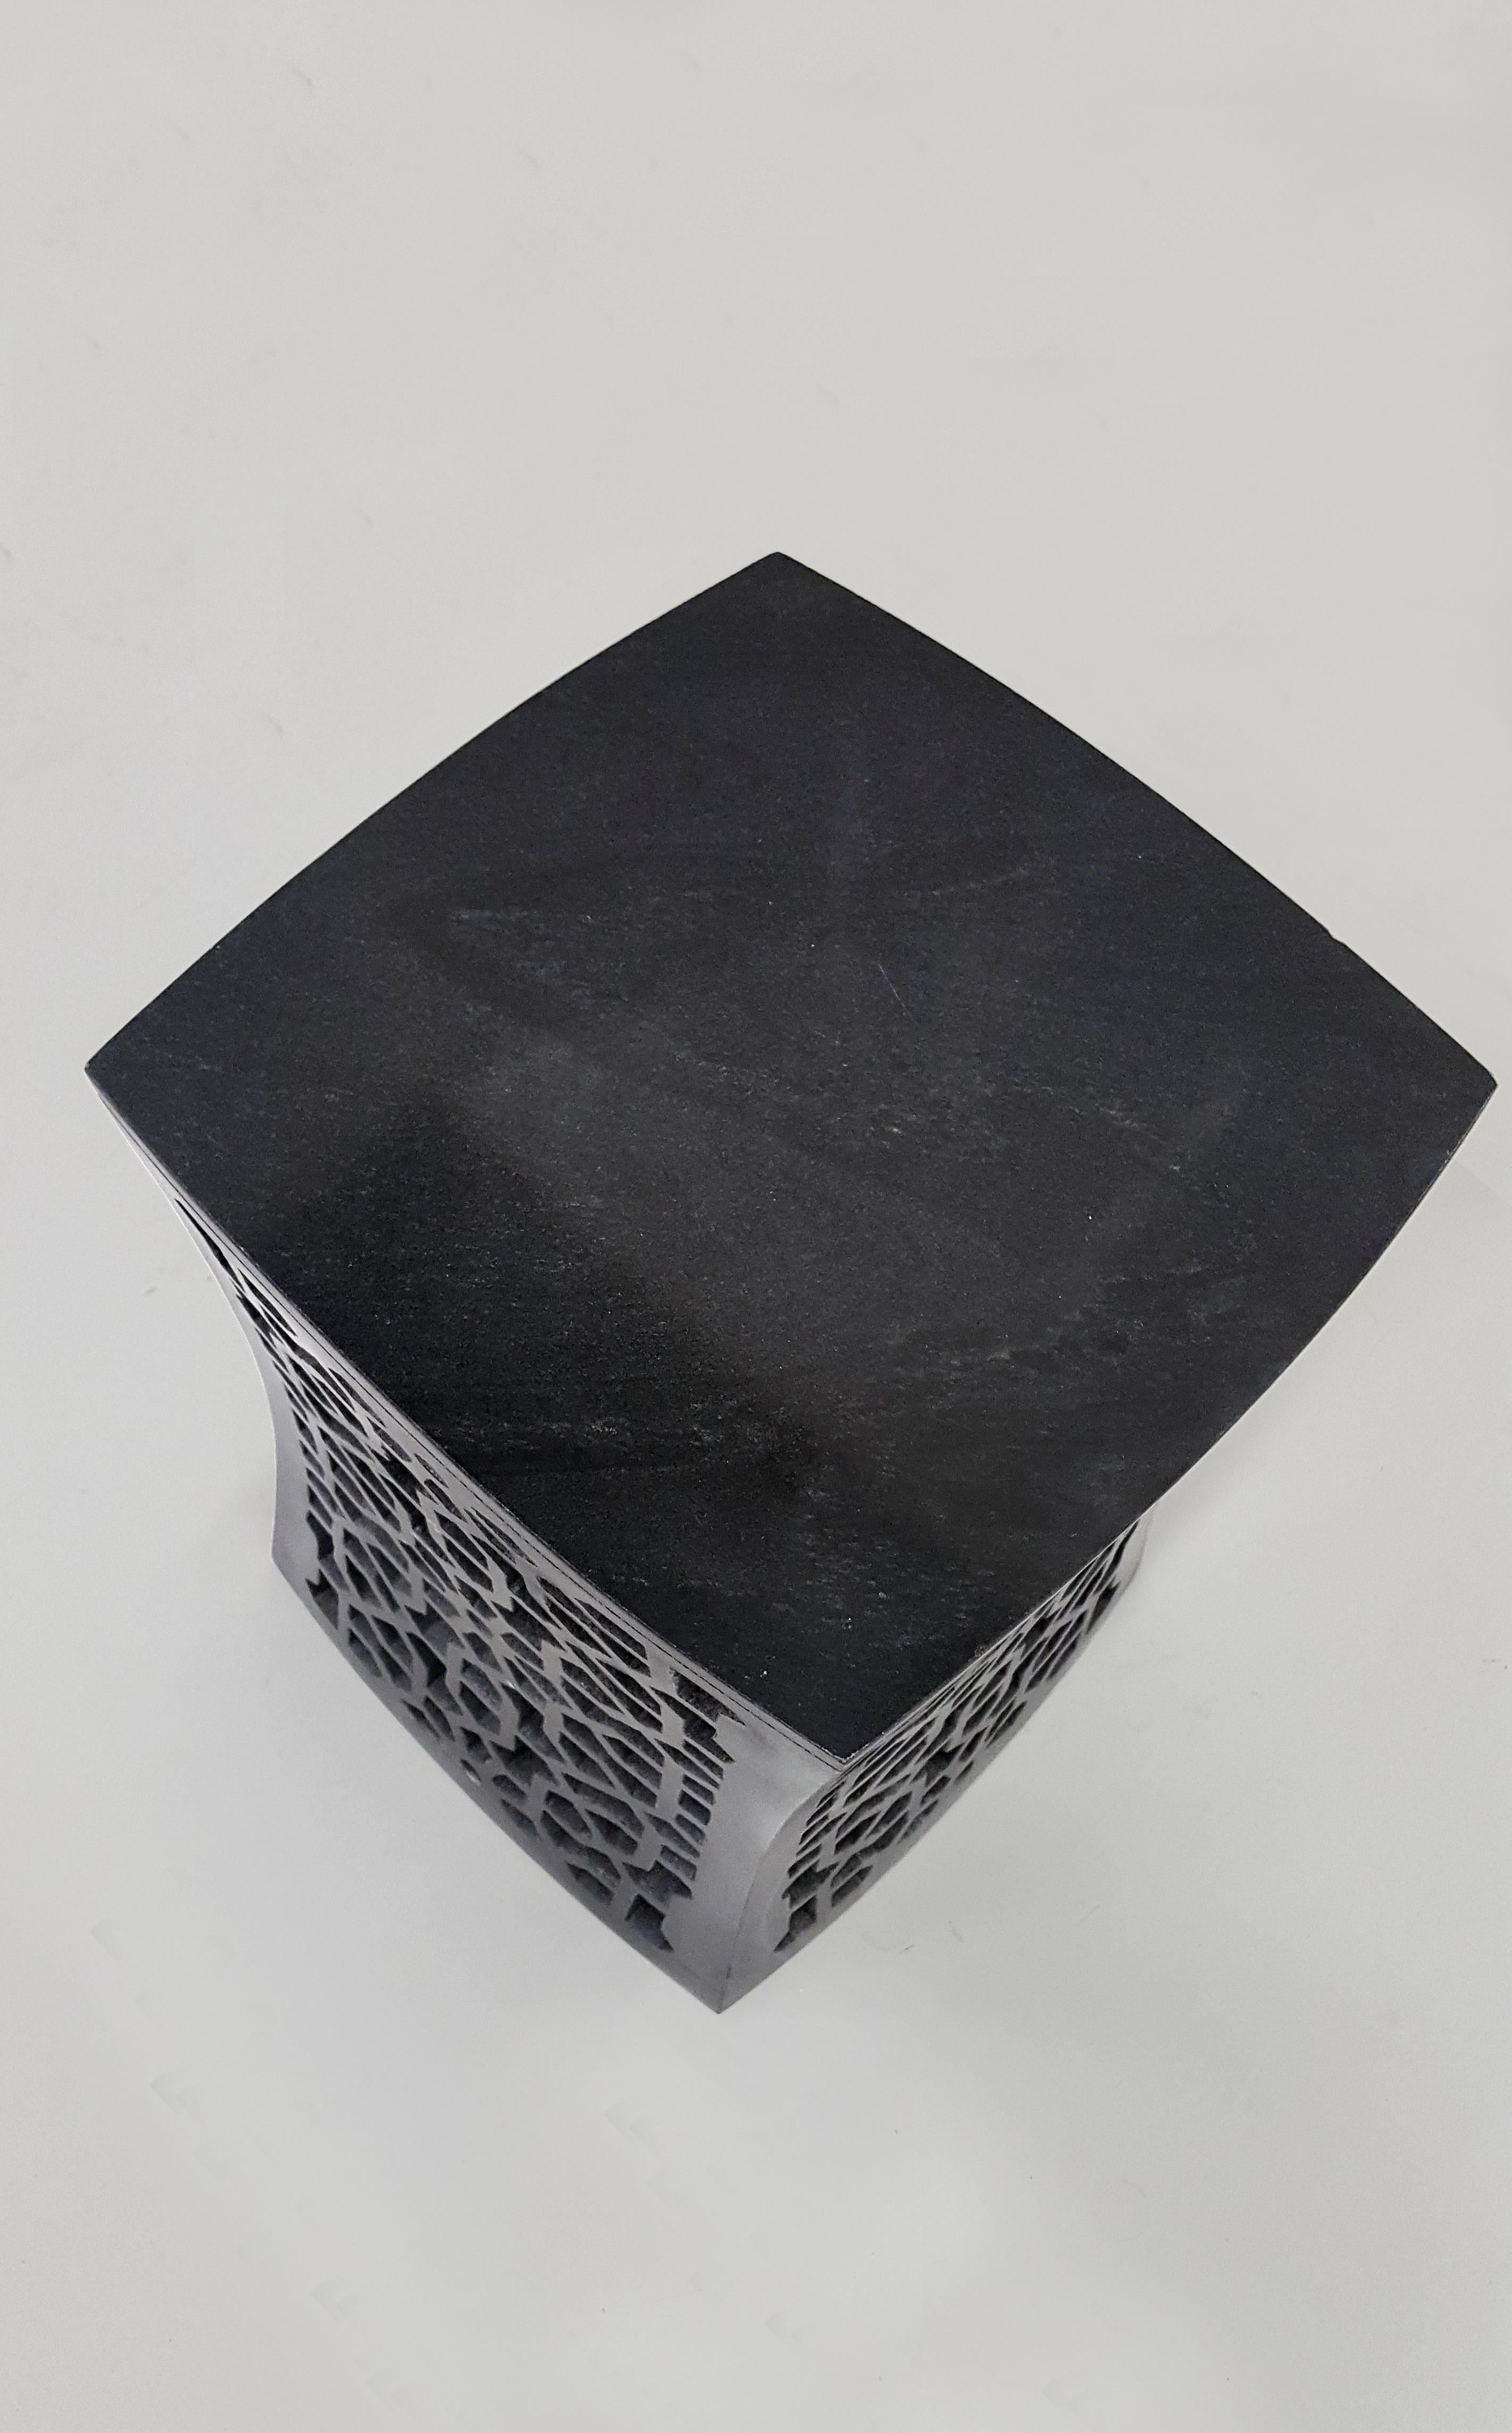 Inspired by the elegant pierced marble “Geometric jali” screens and windows he saw in the palaces of Mughal India, the renowned designer Paul Mathieu has created a unique collection of hand-carved side tables.
 
Solid blocks of marble are hollowed